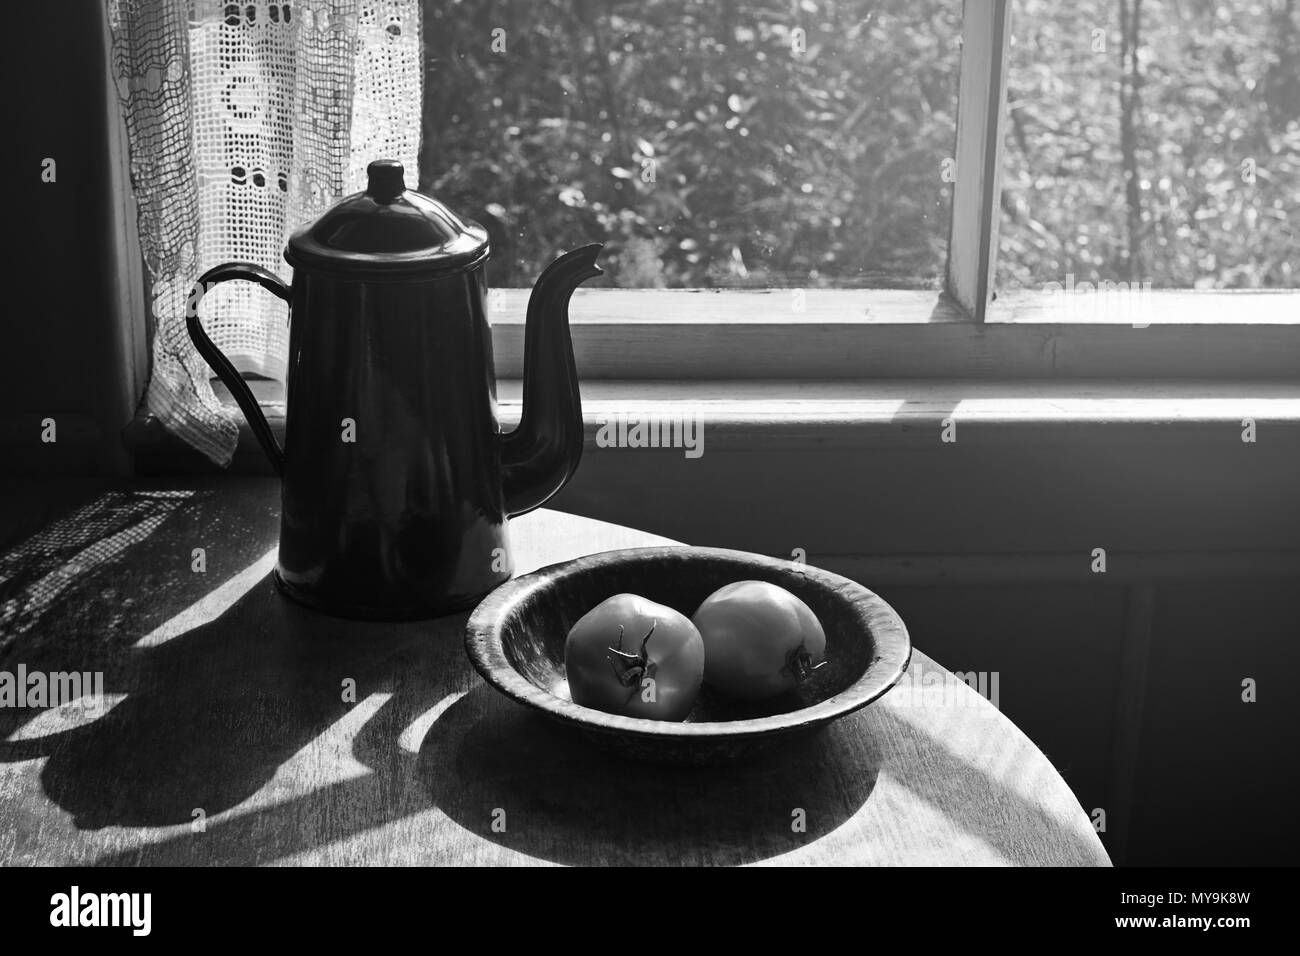 Vintage coffee pot and the two tomato in metallic plate on the round table in the retro interior. Black and white Stock Photo